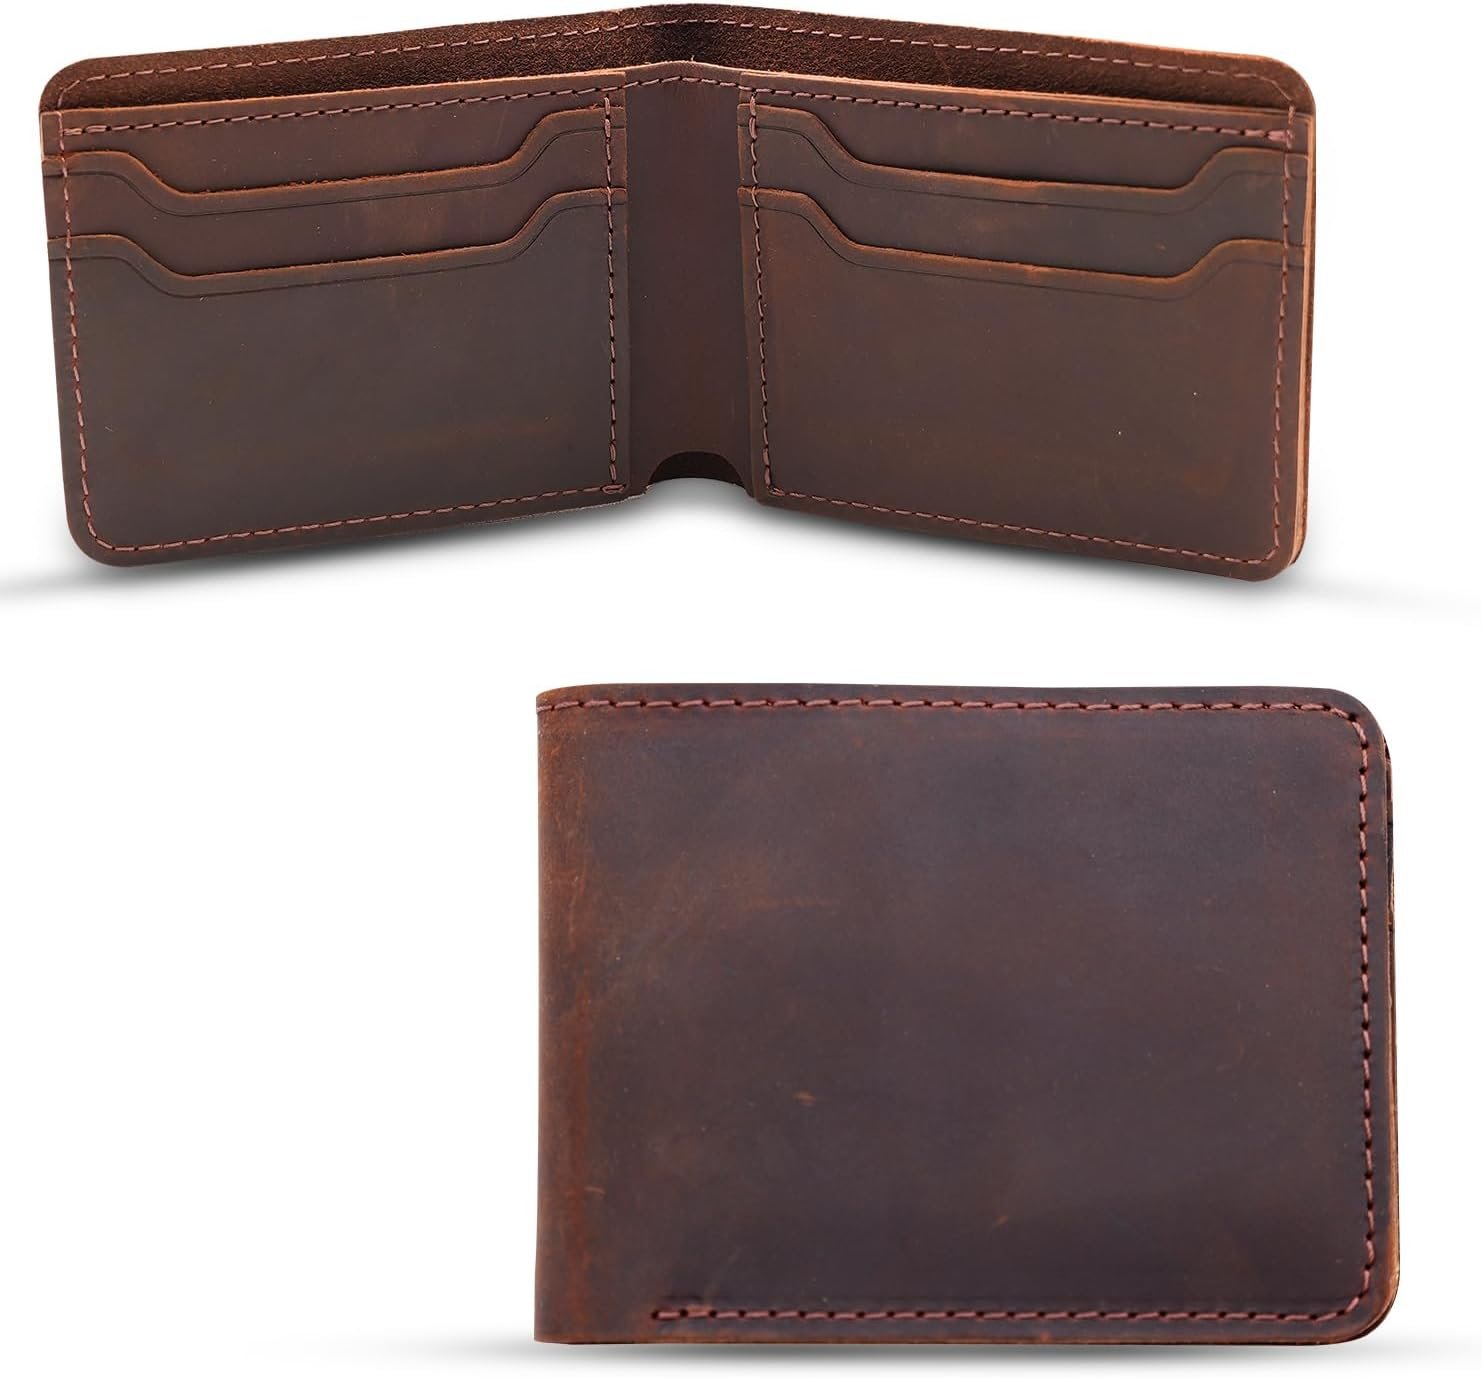 RFID Blocking Leather Wallet Review